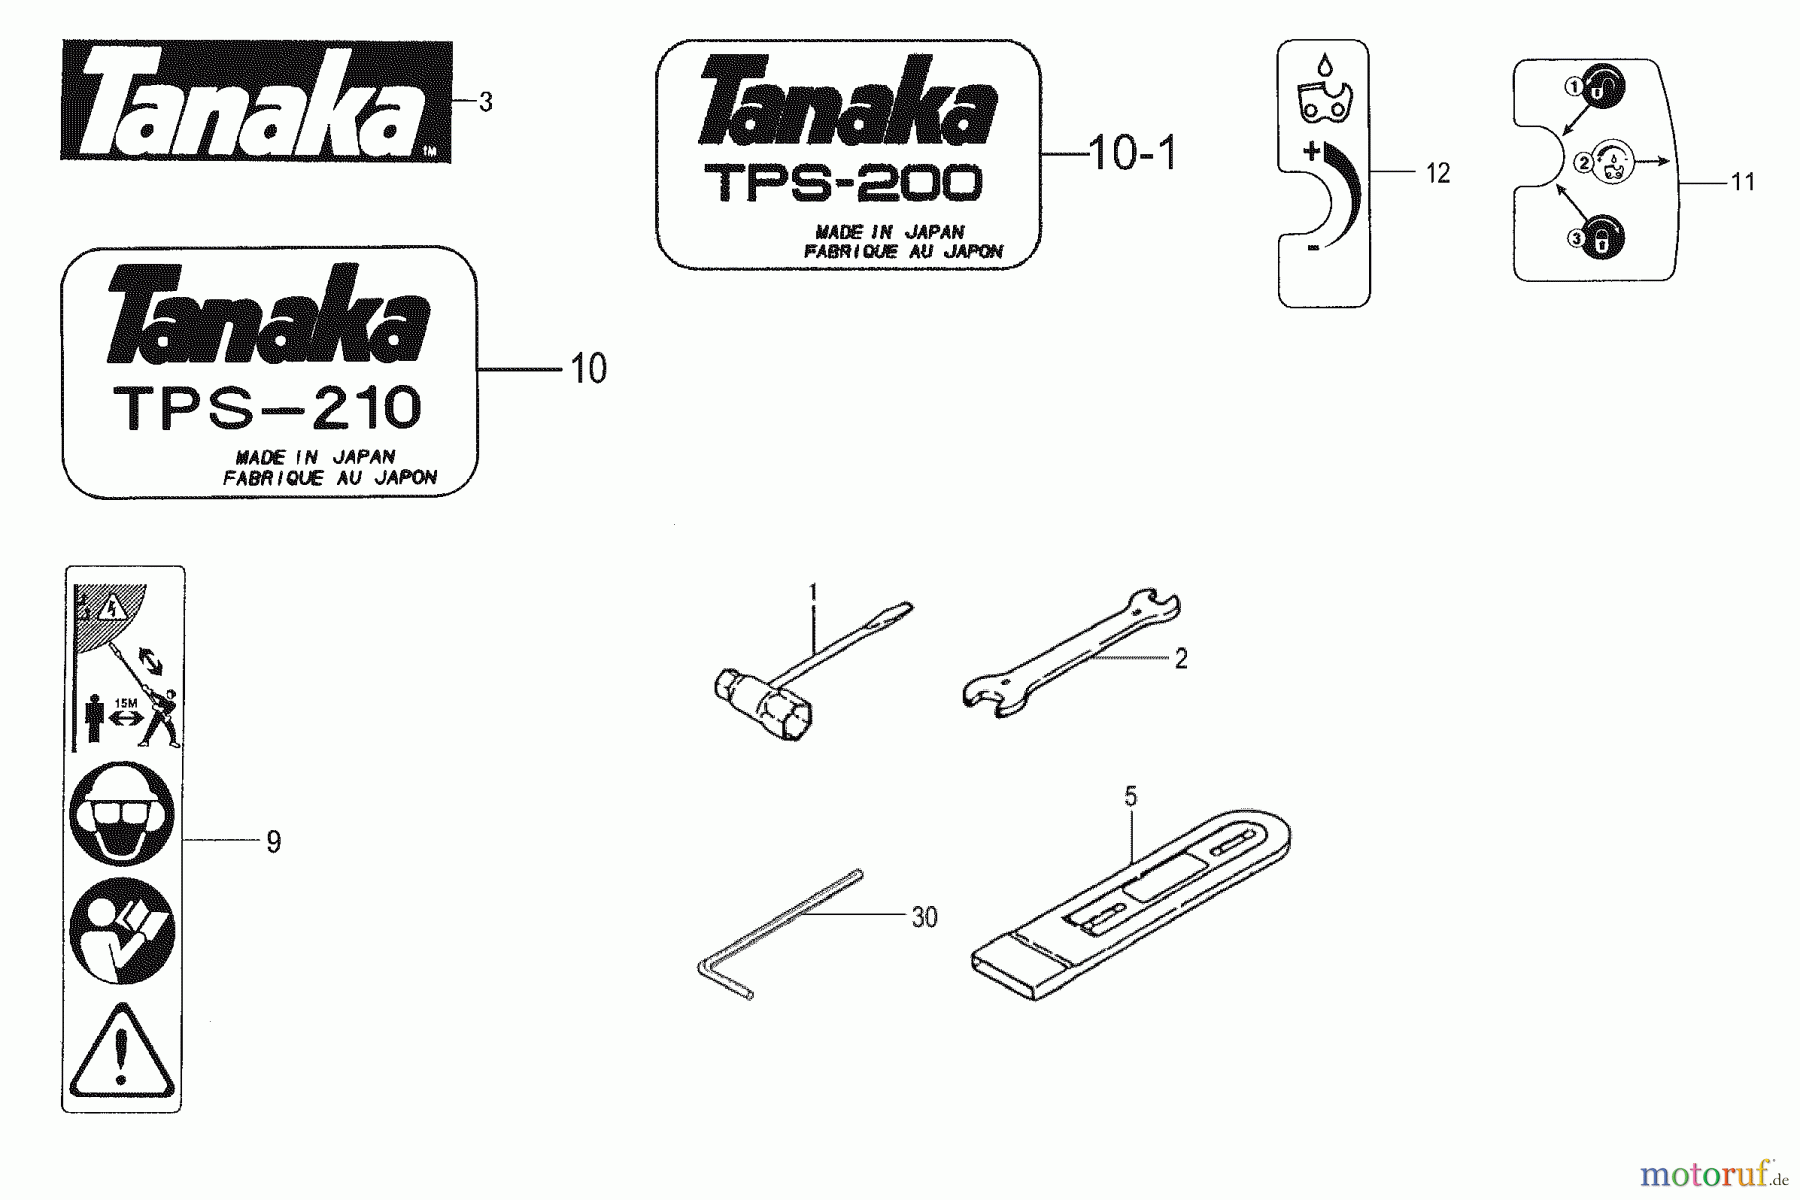  Tanaka Hochentaster TPS-250PN - Tanaka Extended Reach Pole Saw Tools & Decals